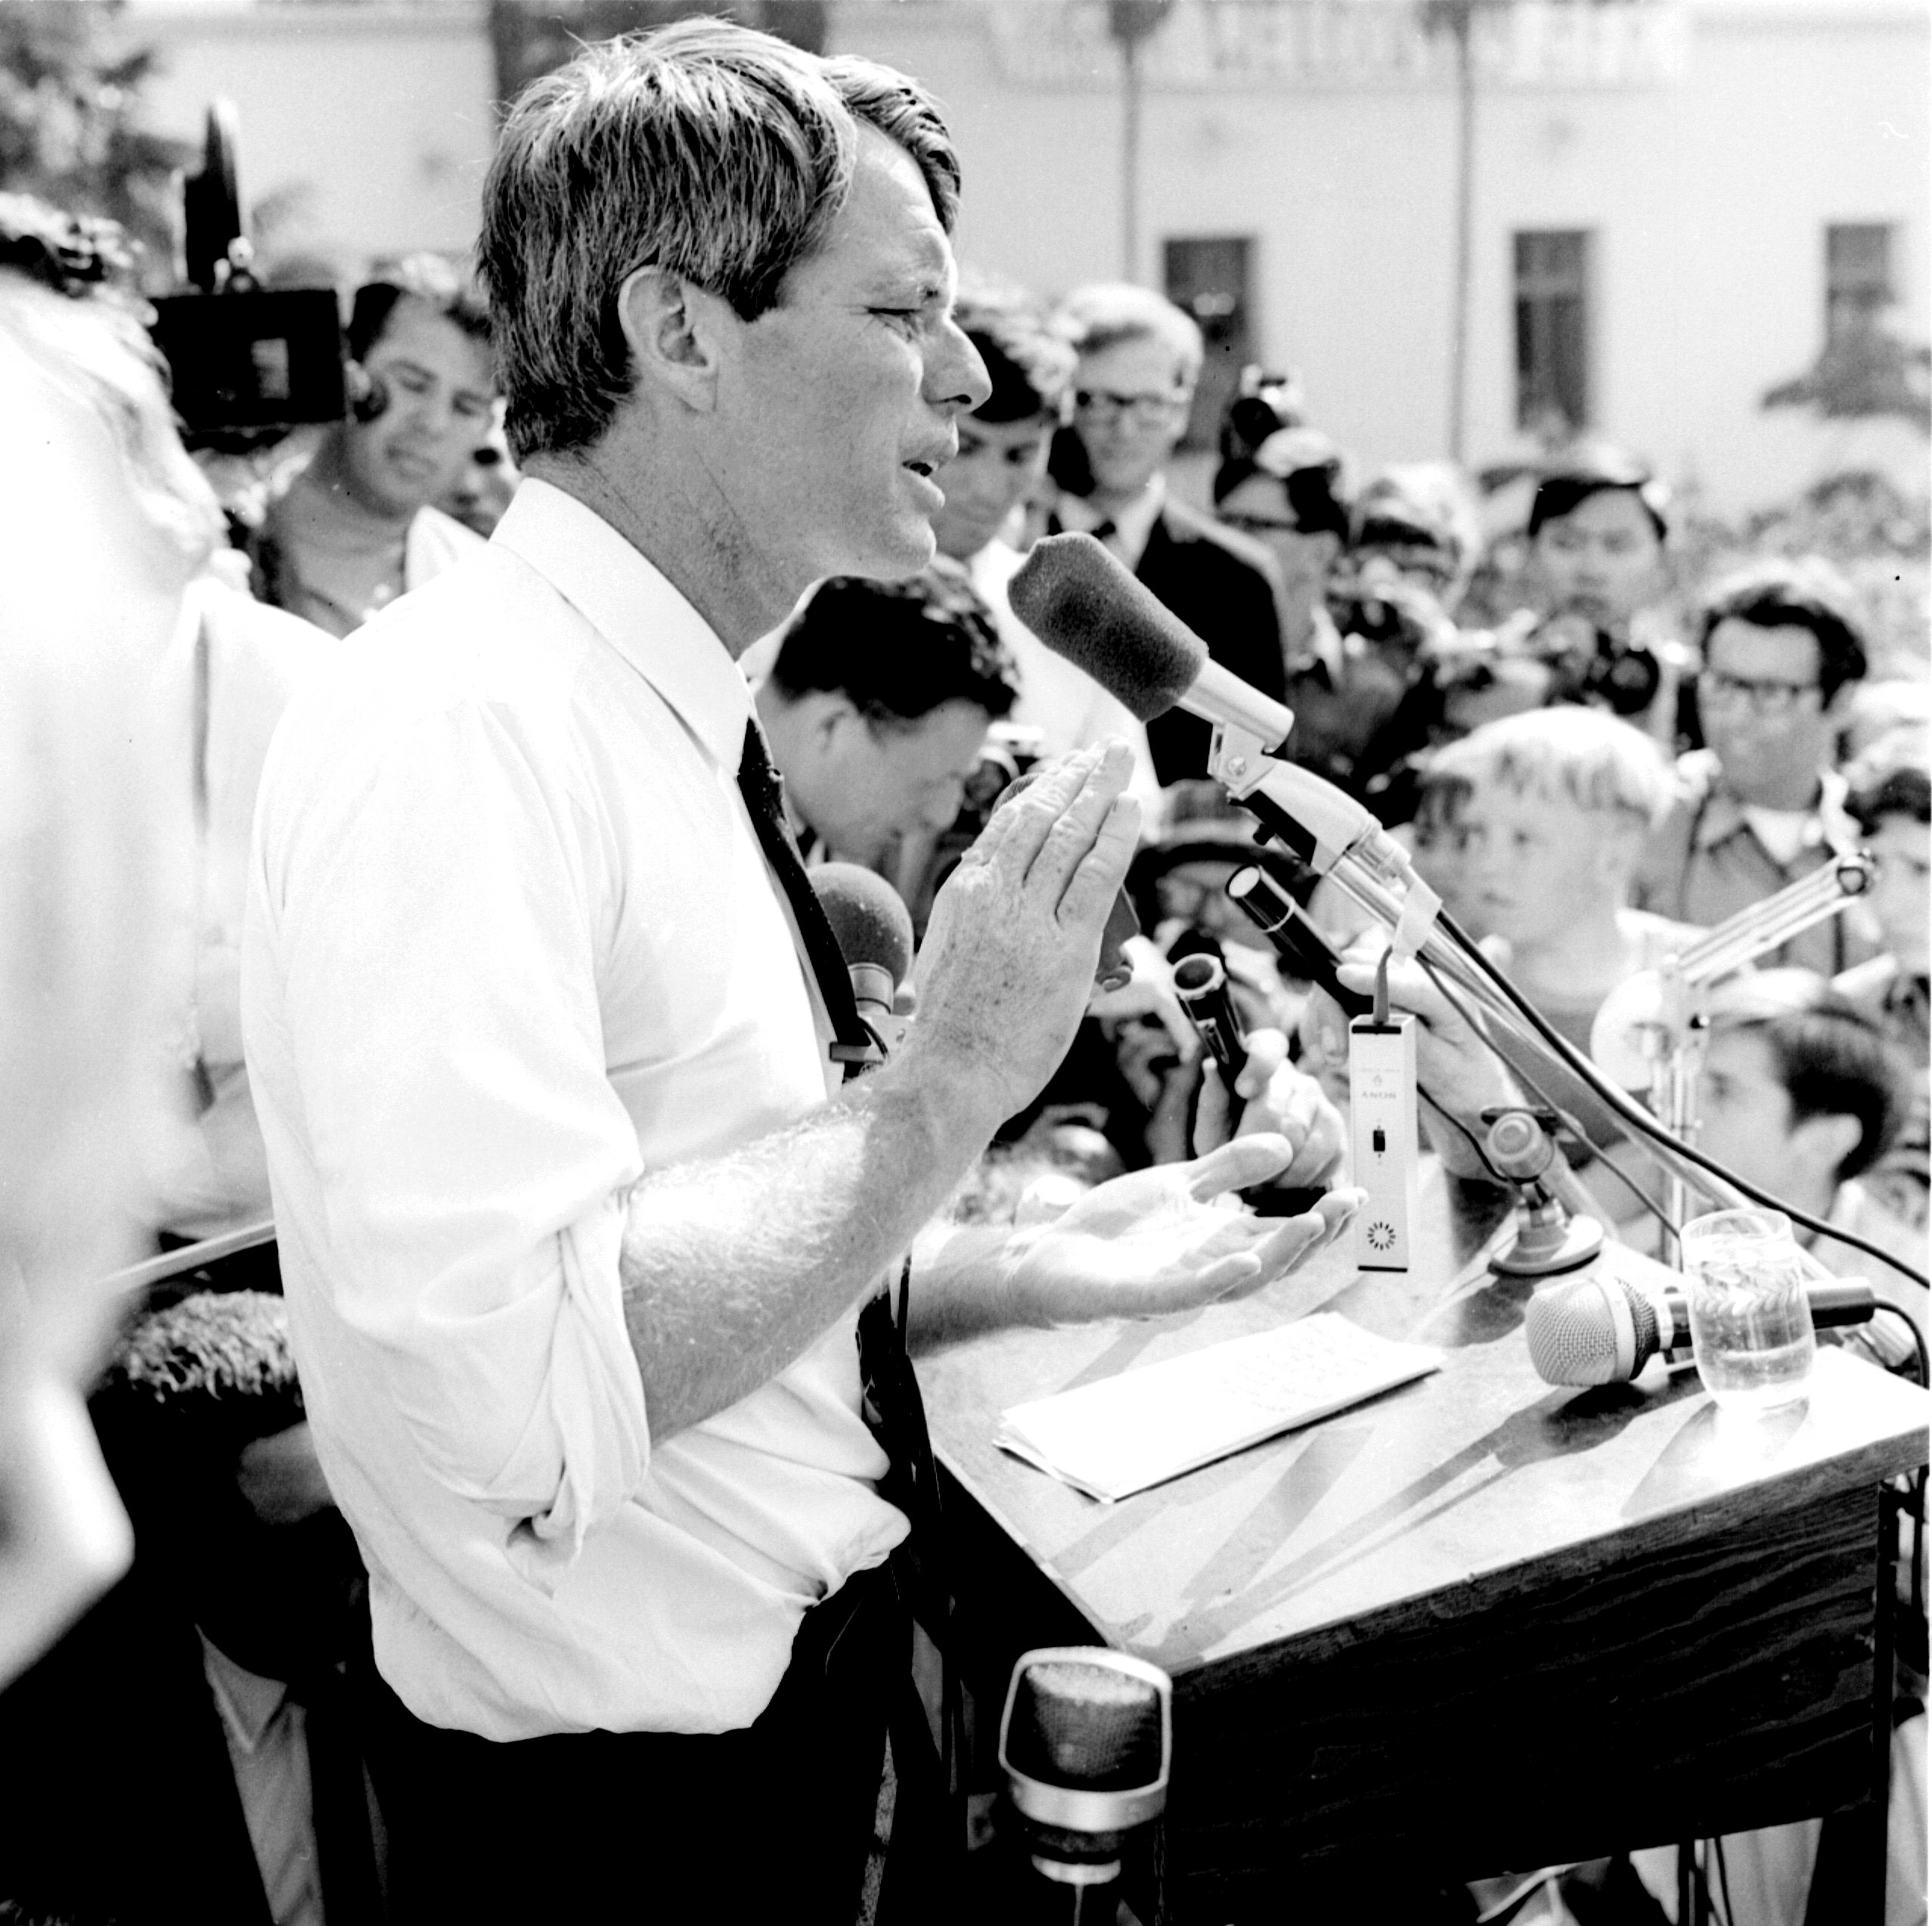 New Medical Analysis Shows What Really Happened On The Night Robert F. Kennedy Was Assassinated